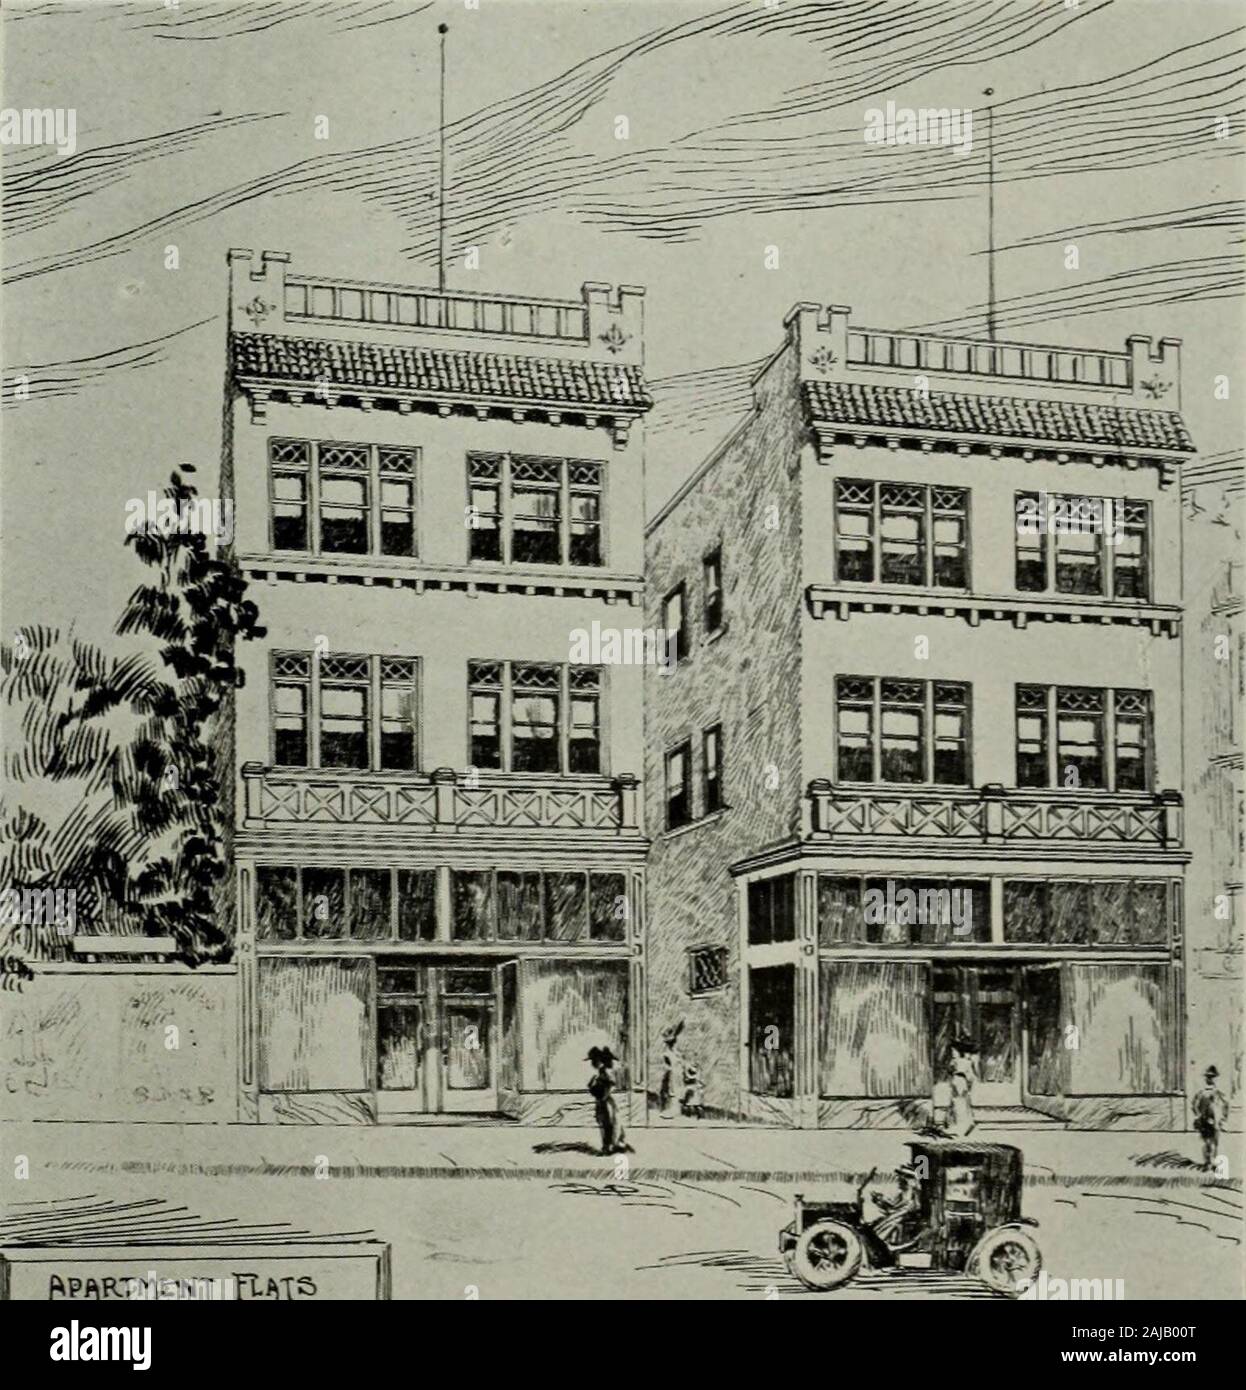 Building and industrial news . Parker and Kenyon. ArchitectsSan Francisco PLATE A Building and Industrial NewsJune 20. 1911. f»r. IV- no^tfxi V PiRTHUR^-ScnOLL V TWO NEW APARTMENT HOUSESSan Francisco Artliiir G. Scliolz. Aiiliitei-tSan Francis=co Building and Industrial NewsJune 20. 1911 PLATE B Filed June 12, 11. Dated June 8, 11. Rough frame up |641 Enclosed, patent chimneys up,roof on and rough plumbing in.. 641 Completed and accepted 641 Usual 35 days 641 Total cost, »2564 Bond, $1282. Surety, American Bonding Co. Limit, 65 days. Forfeit, $5. Plans and specifications filed. (2196) Twentiet Stock Photo